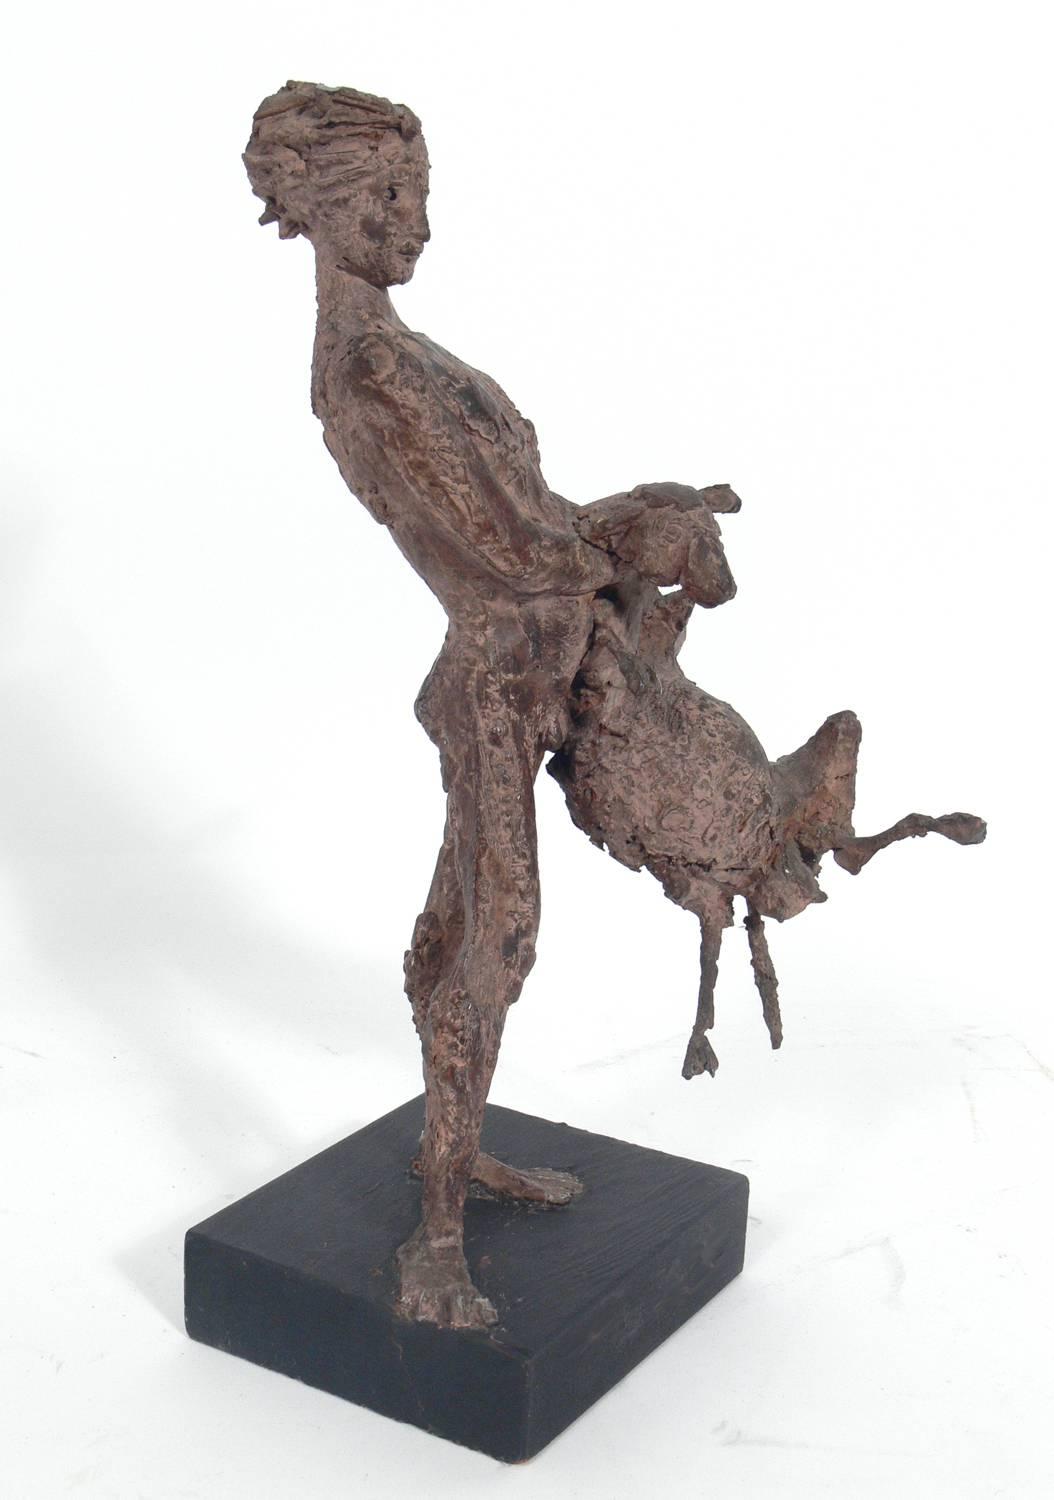 Italian Modernist sculpture of playful nude boy with lamb, artist unknown, Italy, circa 1950s. Constructed of clay or resin on original painted wood base.